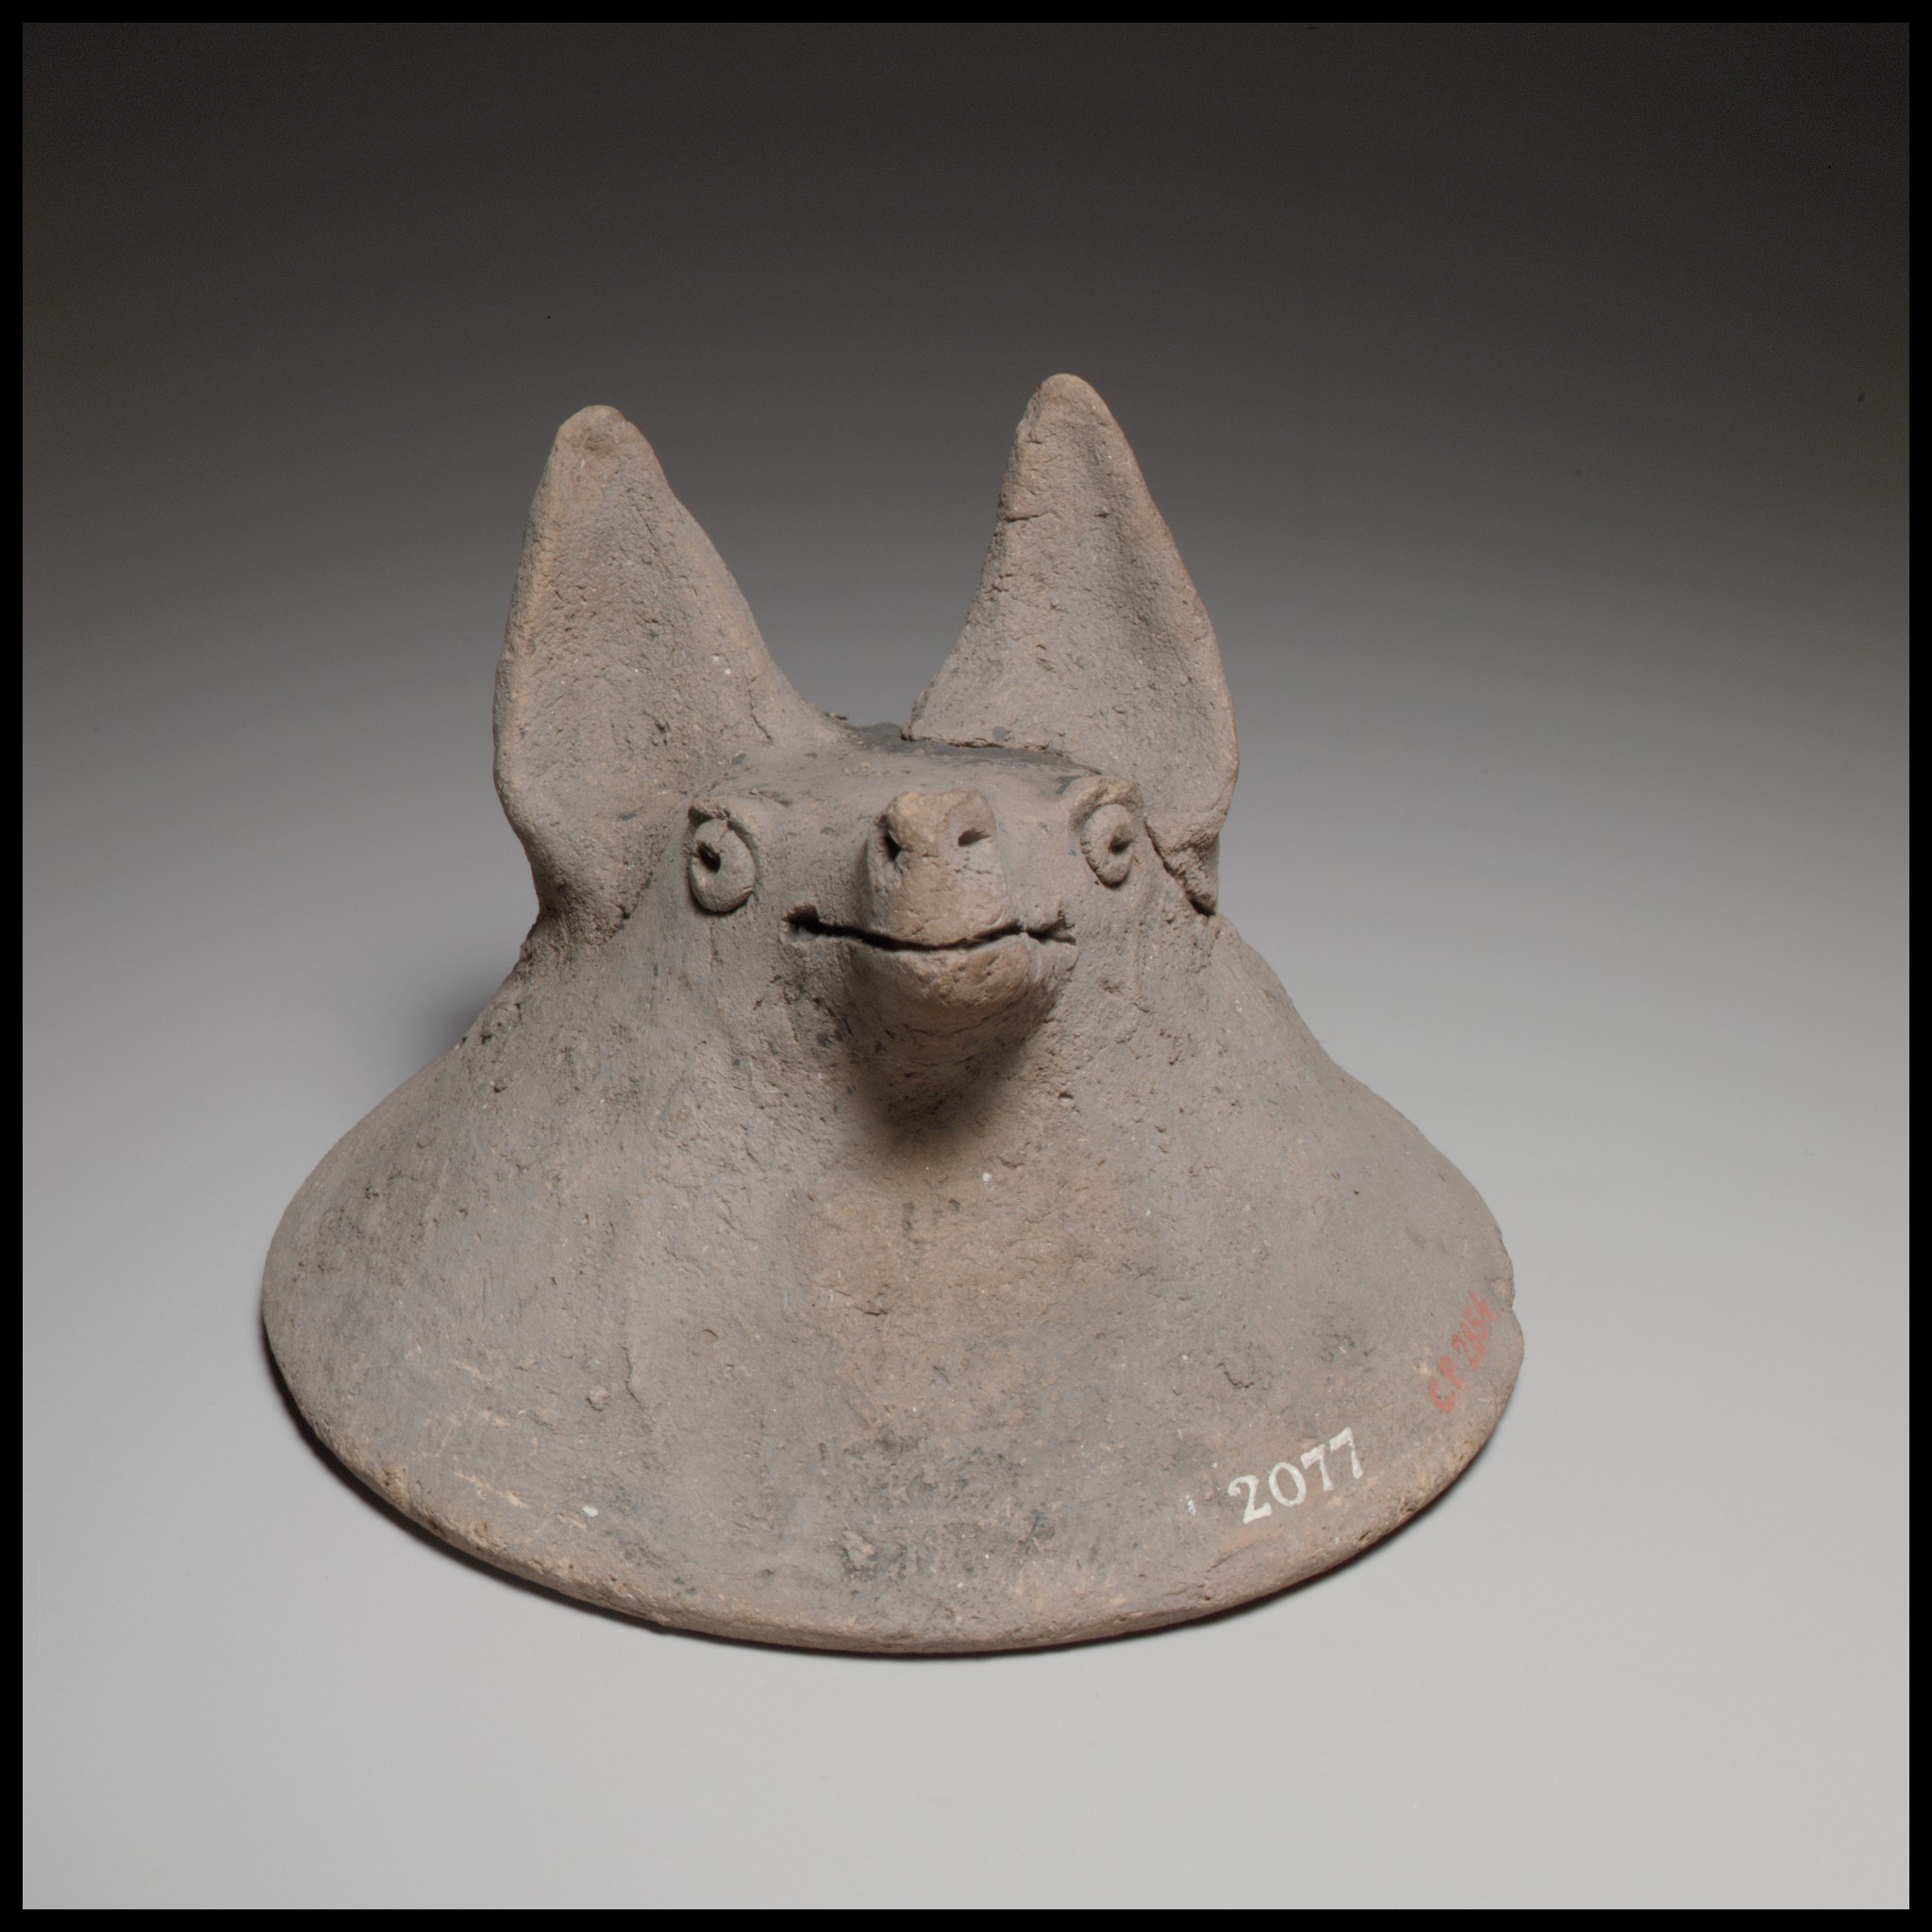 Made 600-480BC. Perhaps it is a bat